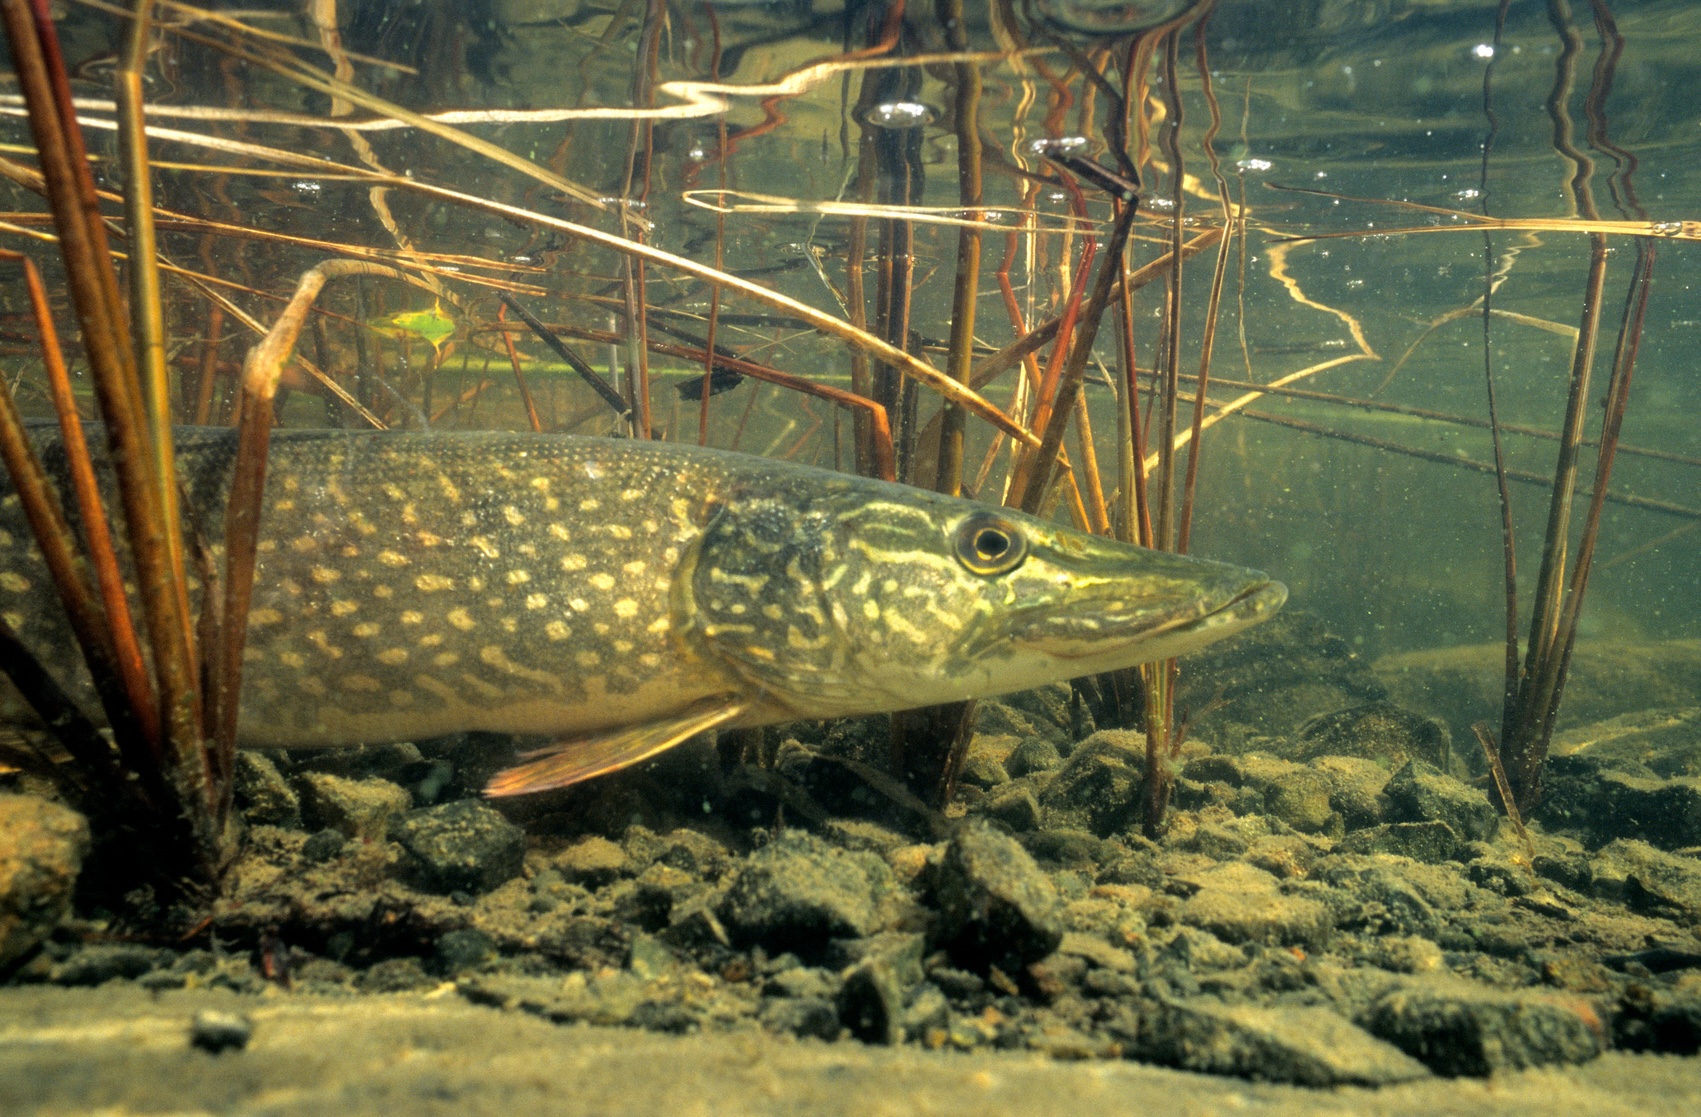 A live northern pike fish waits in the shallows of a weedy lake.